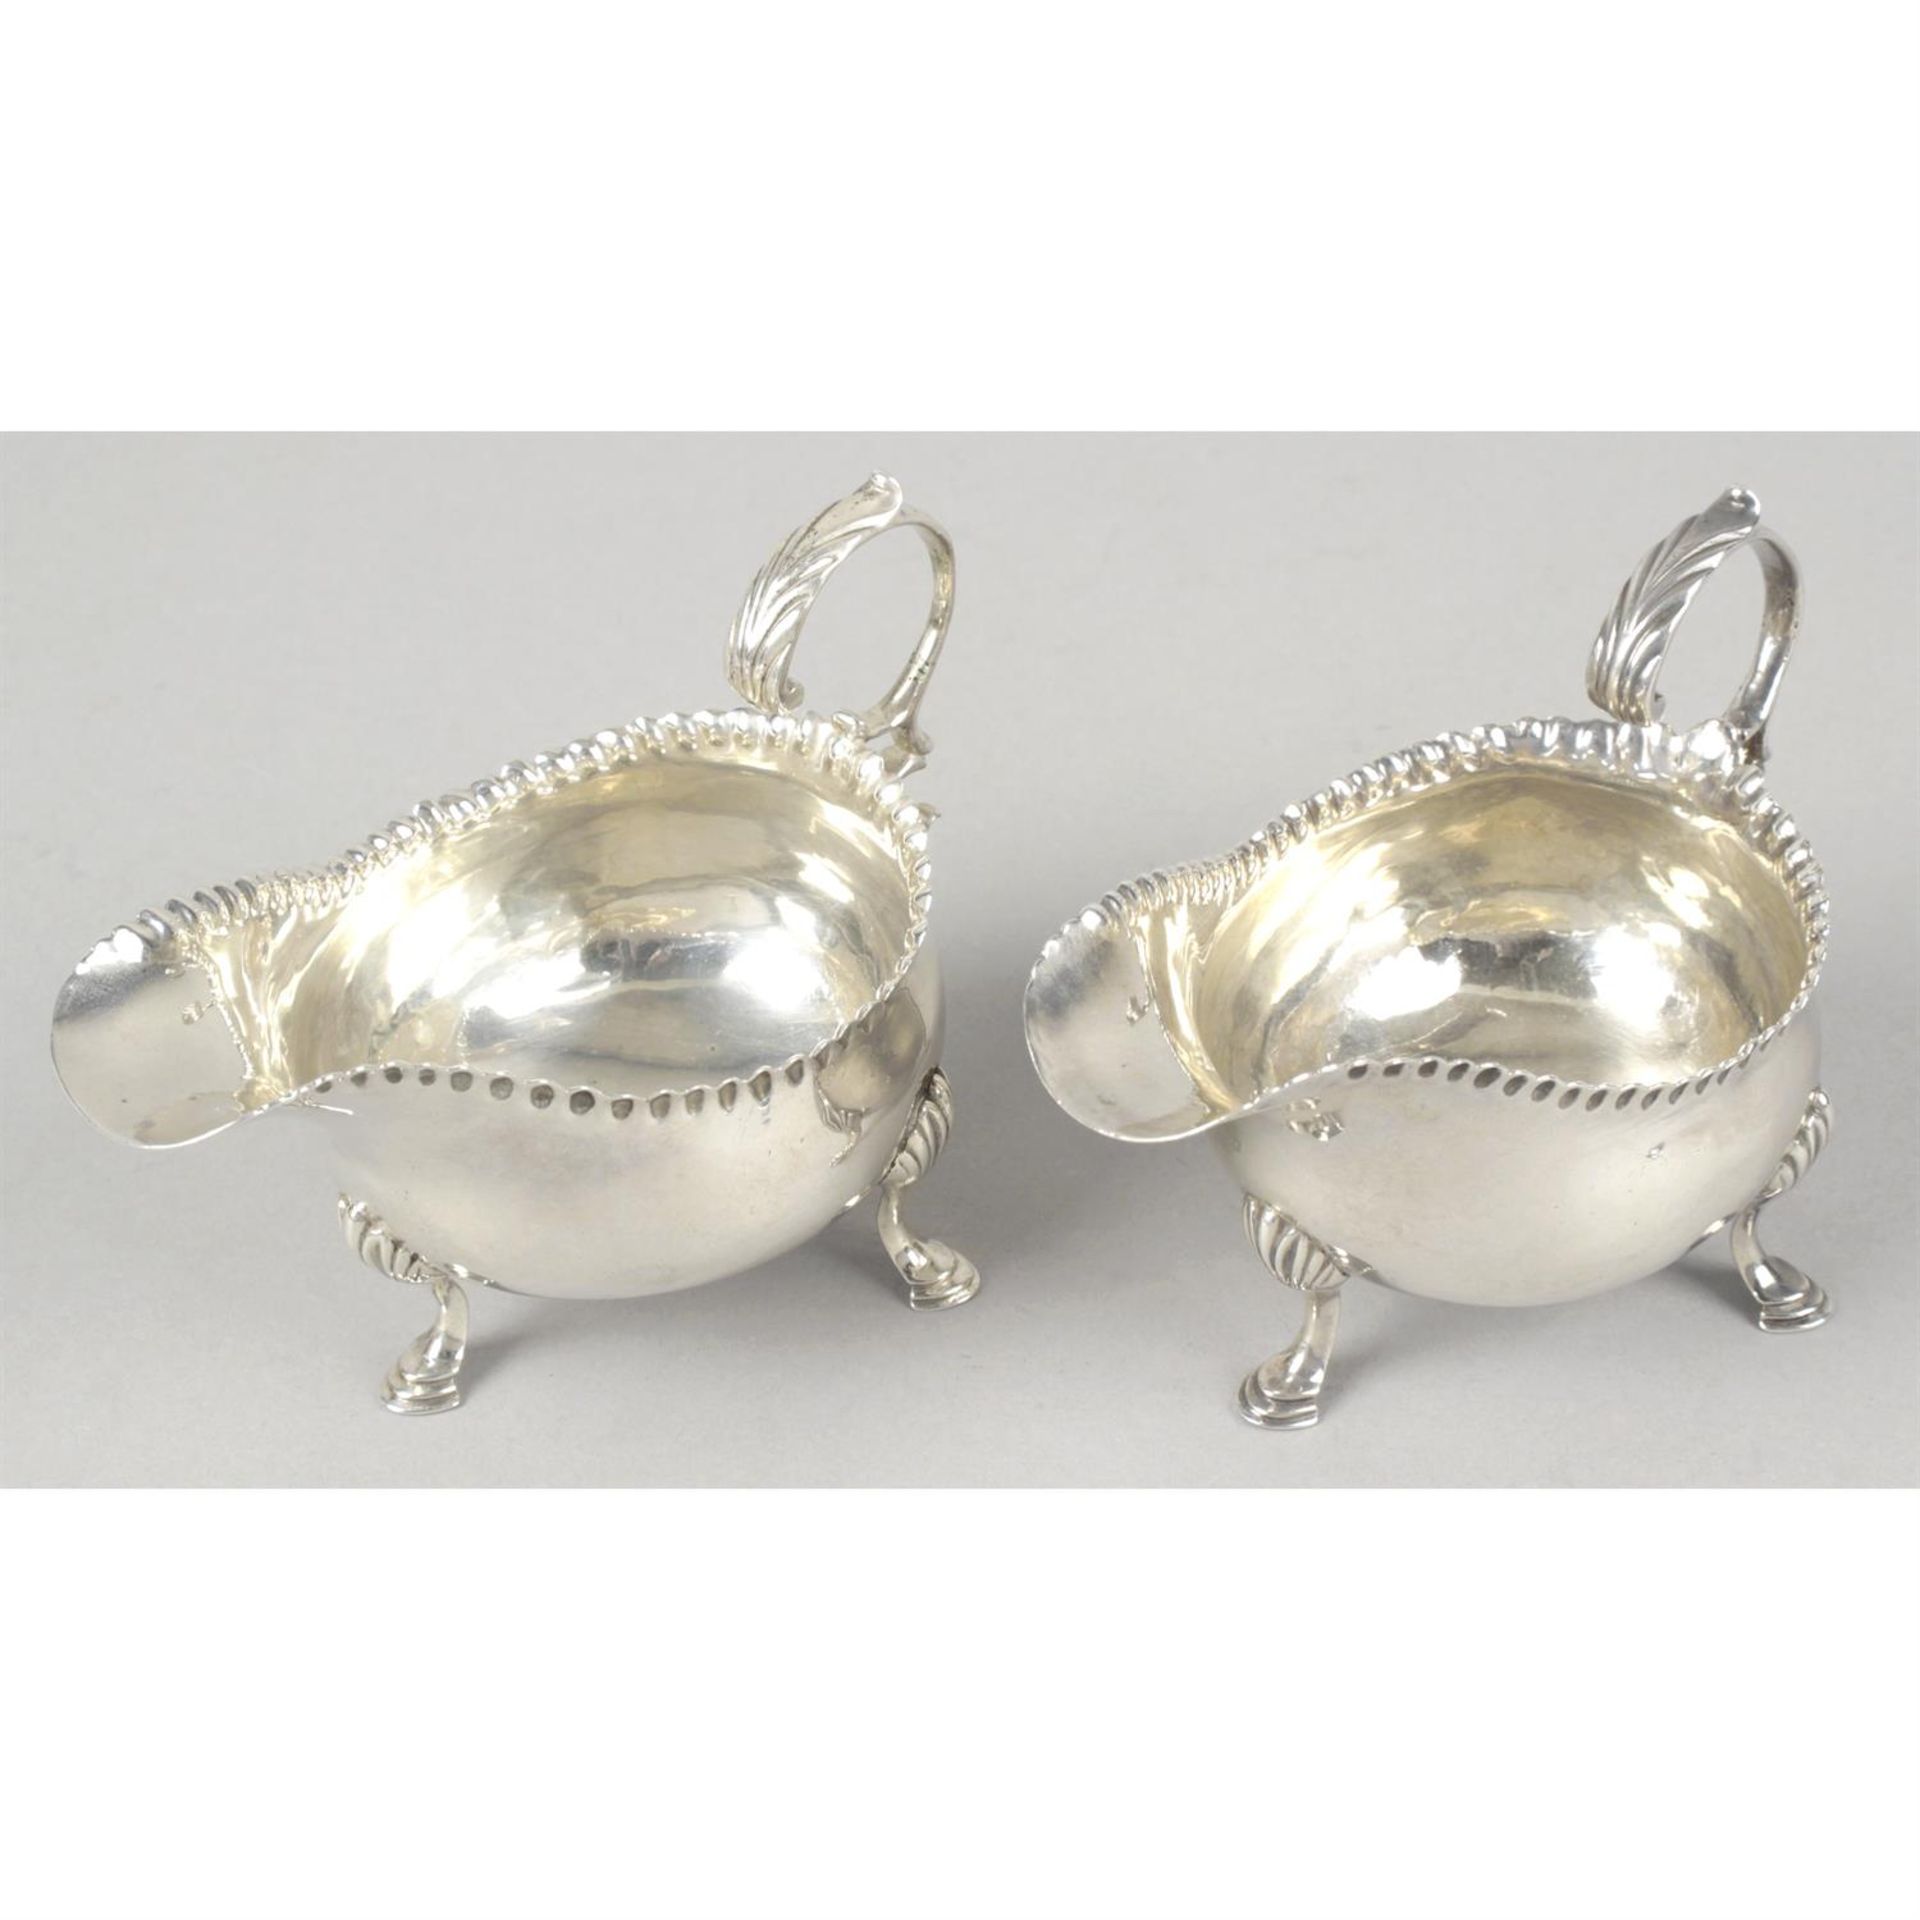 A pair of George III small silver sauce boats by Hester Bateman.